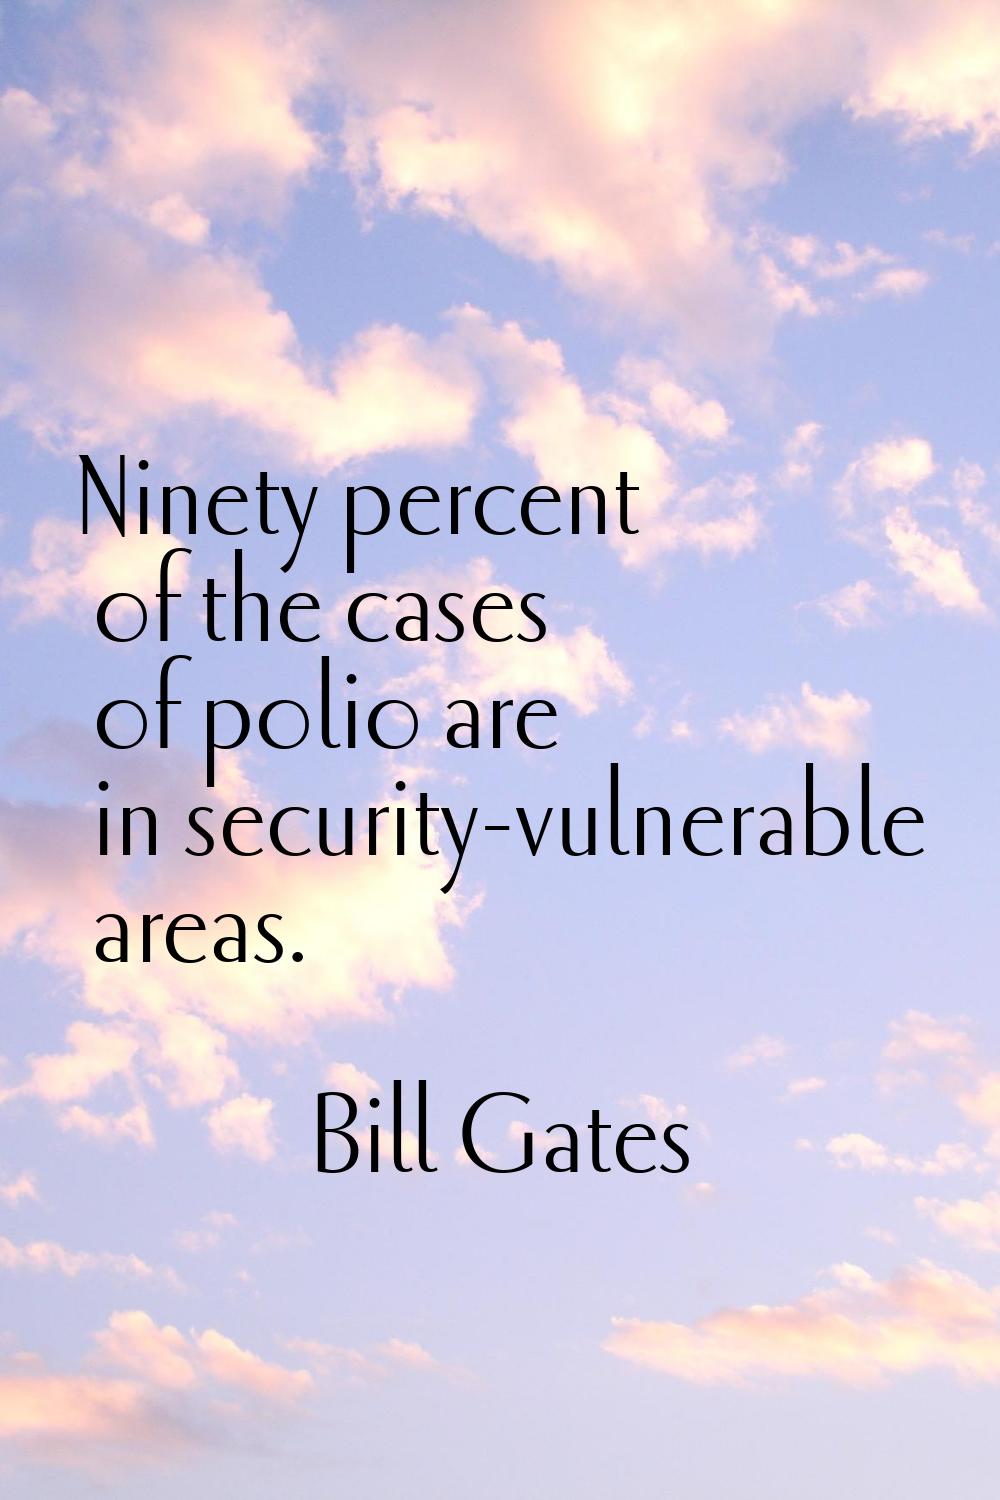 Ninety percent of the cases of polio are in security-vulnerable areas.